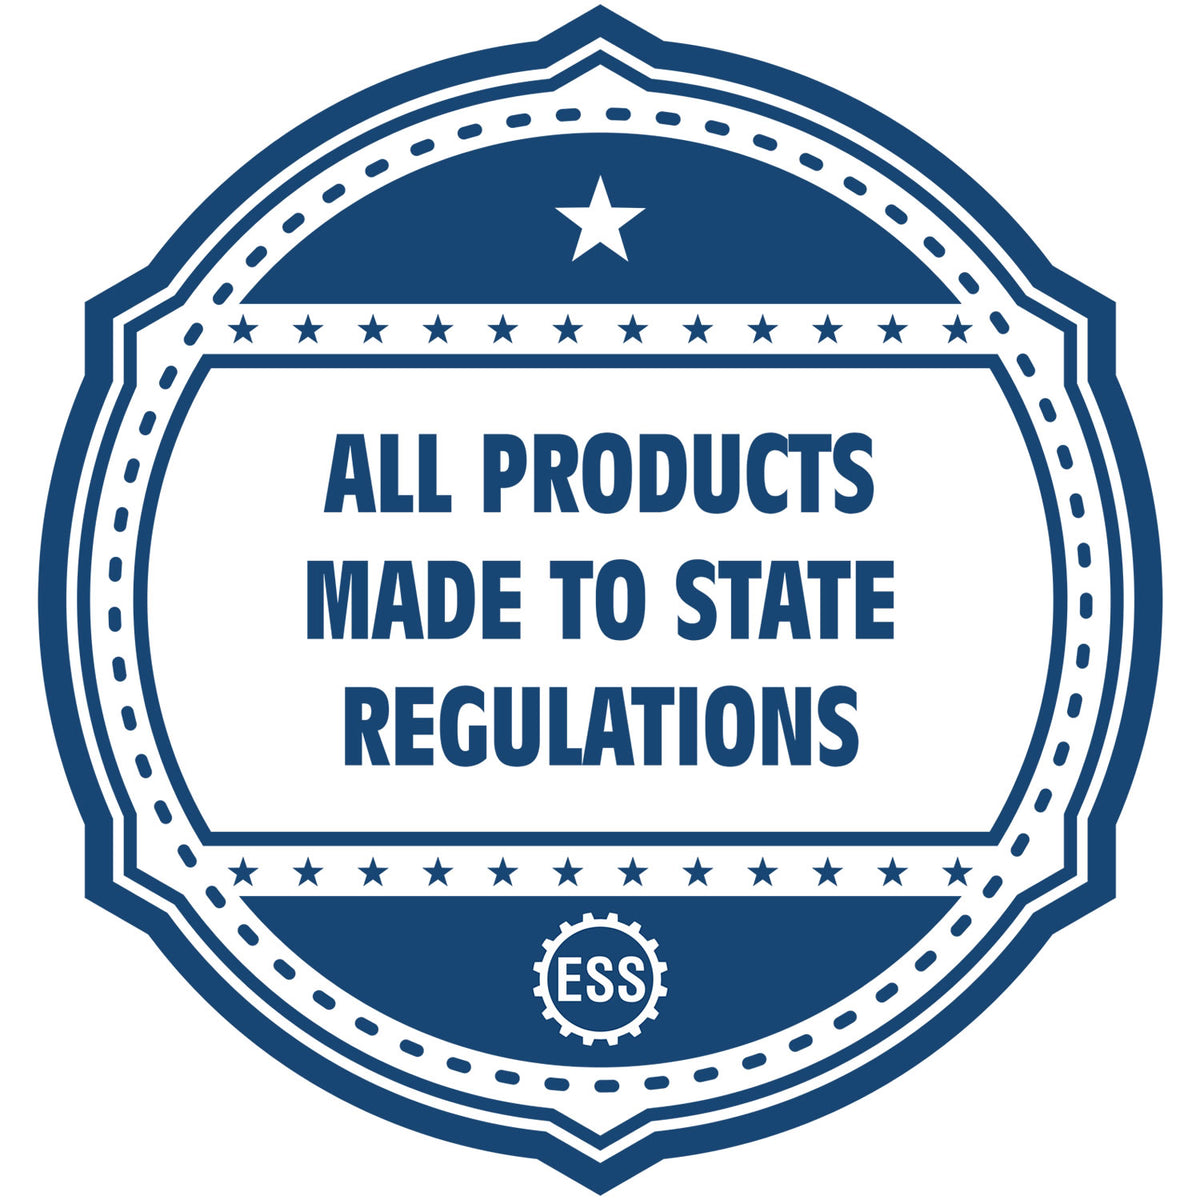 An icon or badge element for the Arizona Desk Architect Embossing Seal showing that this product is made in compliance with state regulations.